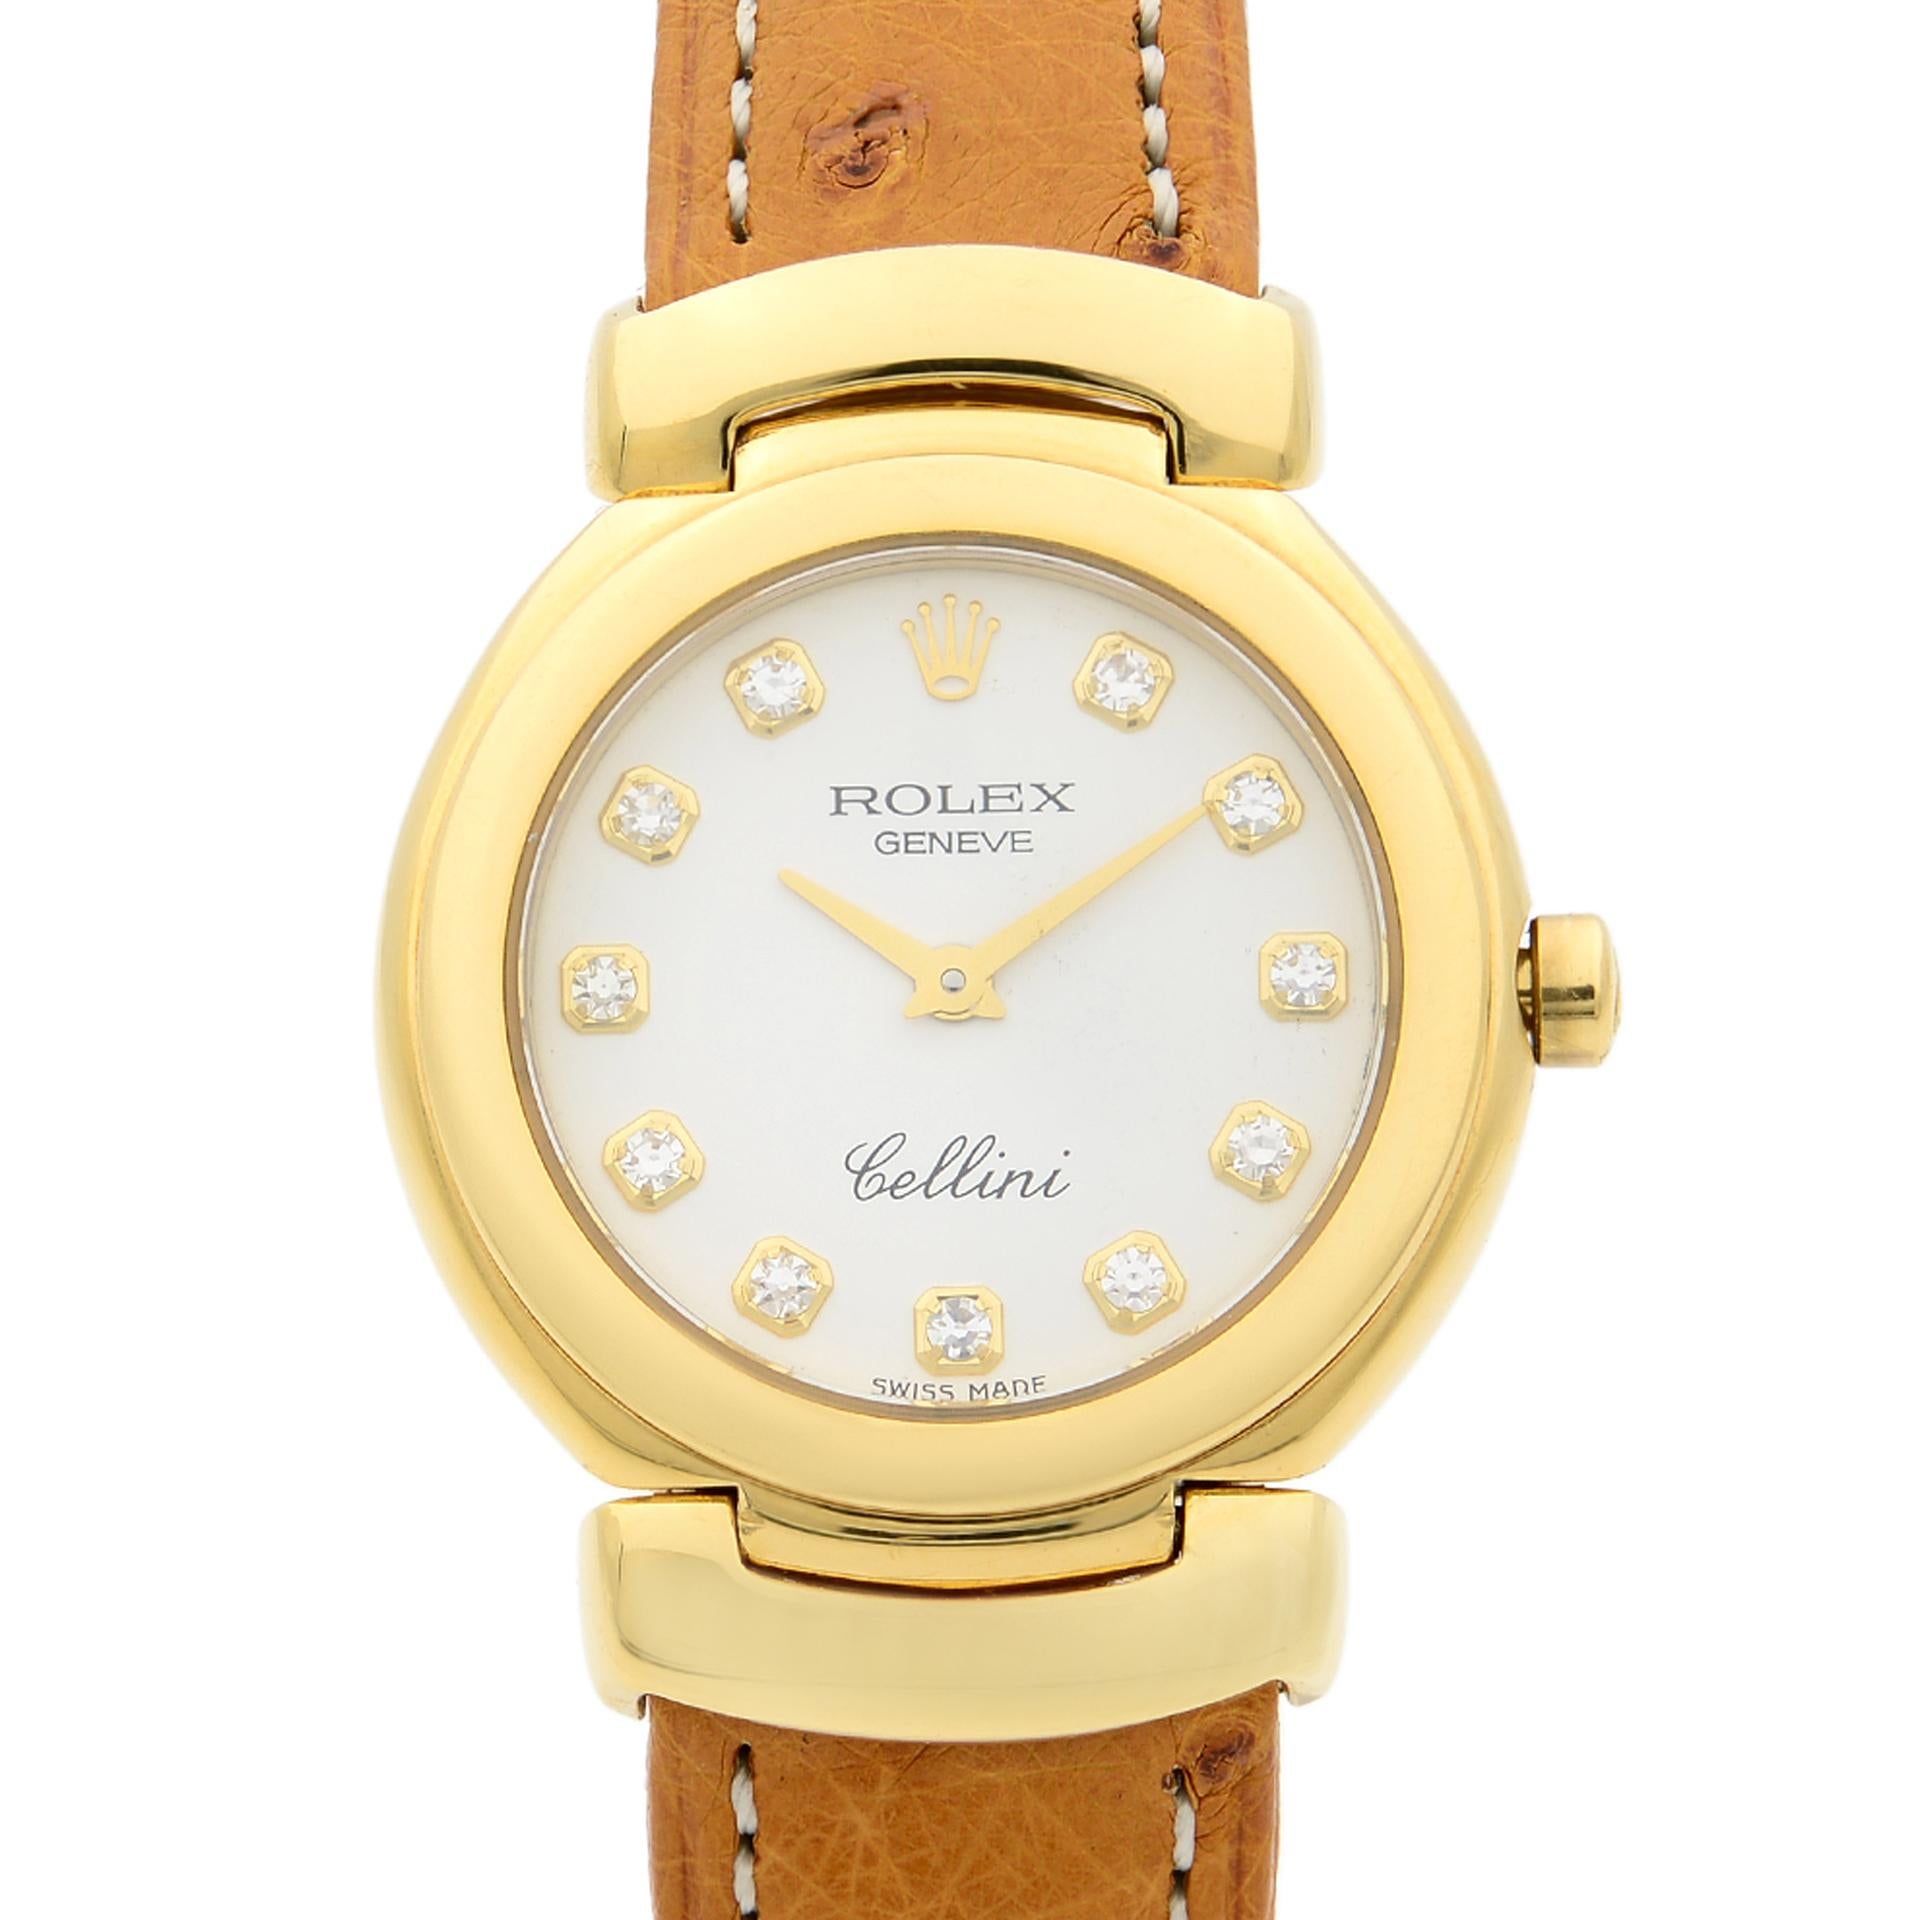 This pre-owned Rolex Cellini  6221 is a beautiful Ladie's timepiece that is powered by mechanical (automatic) movement which is cased in a yellow gold case. It has a round shape face,  dial and has hand diamonds style markers. It is completed with a